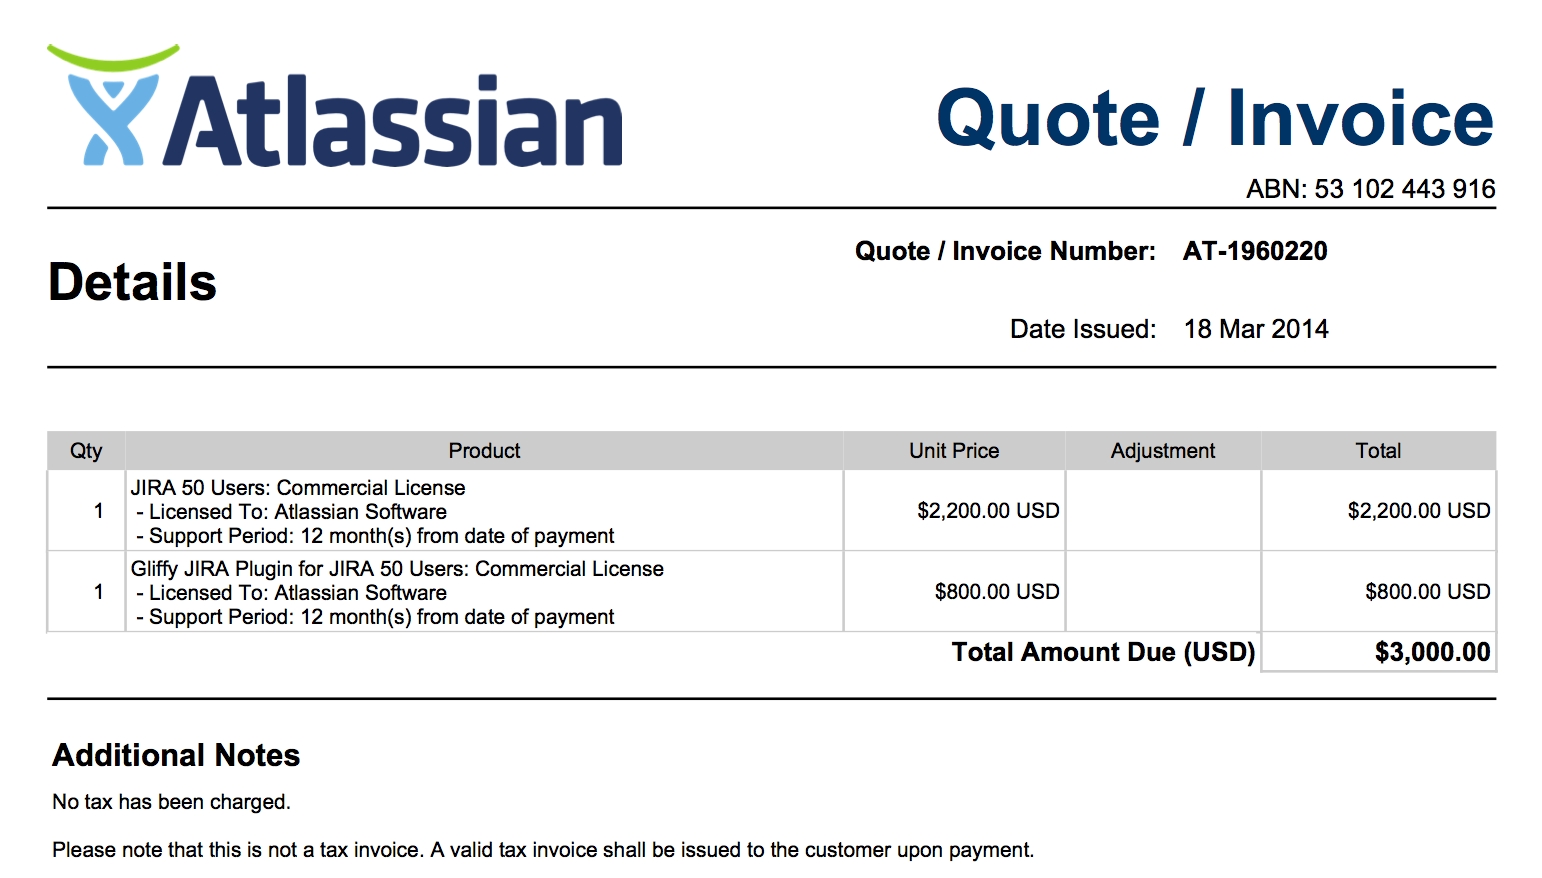 advance payment invoice sample pricing payment amp billing atlassian developers 1542 X 878